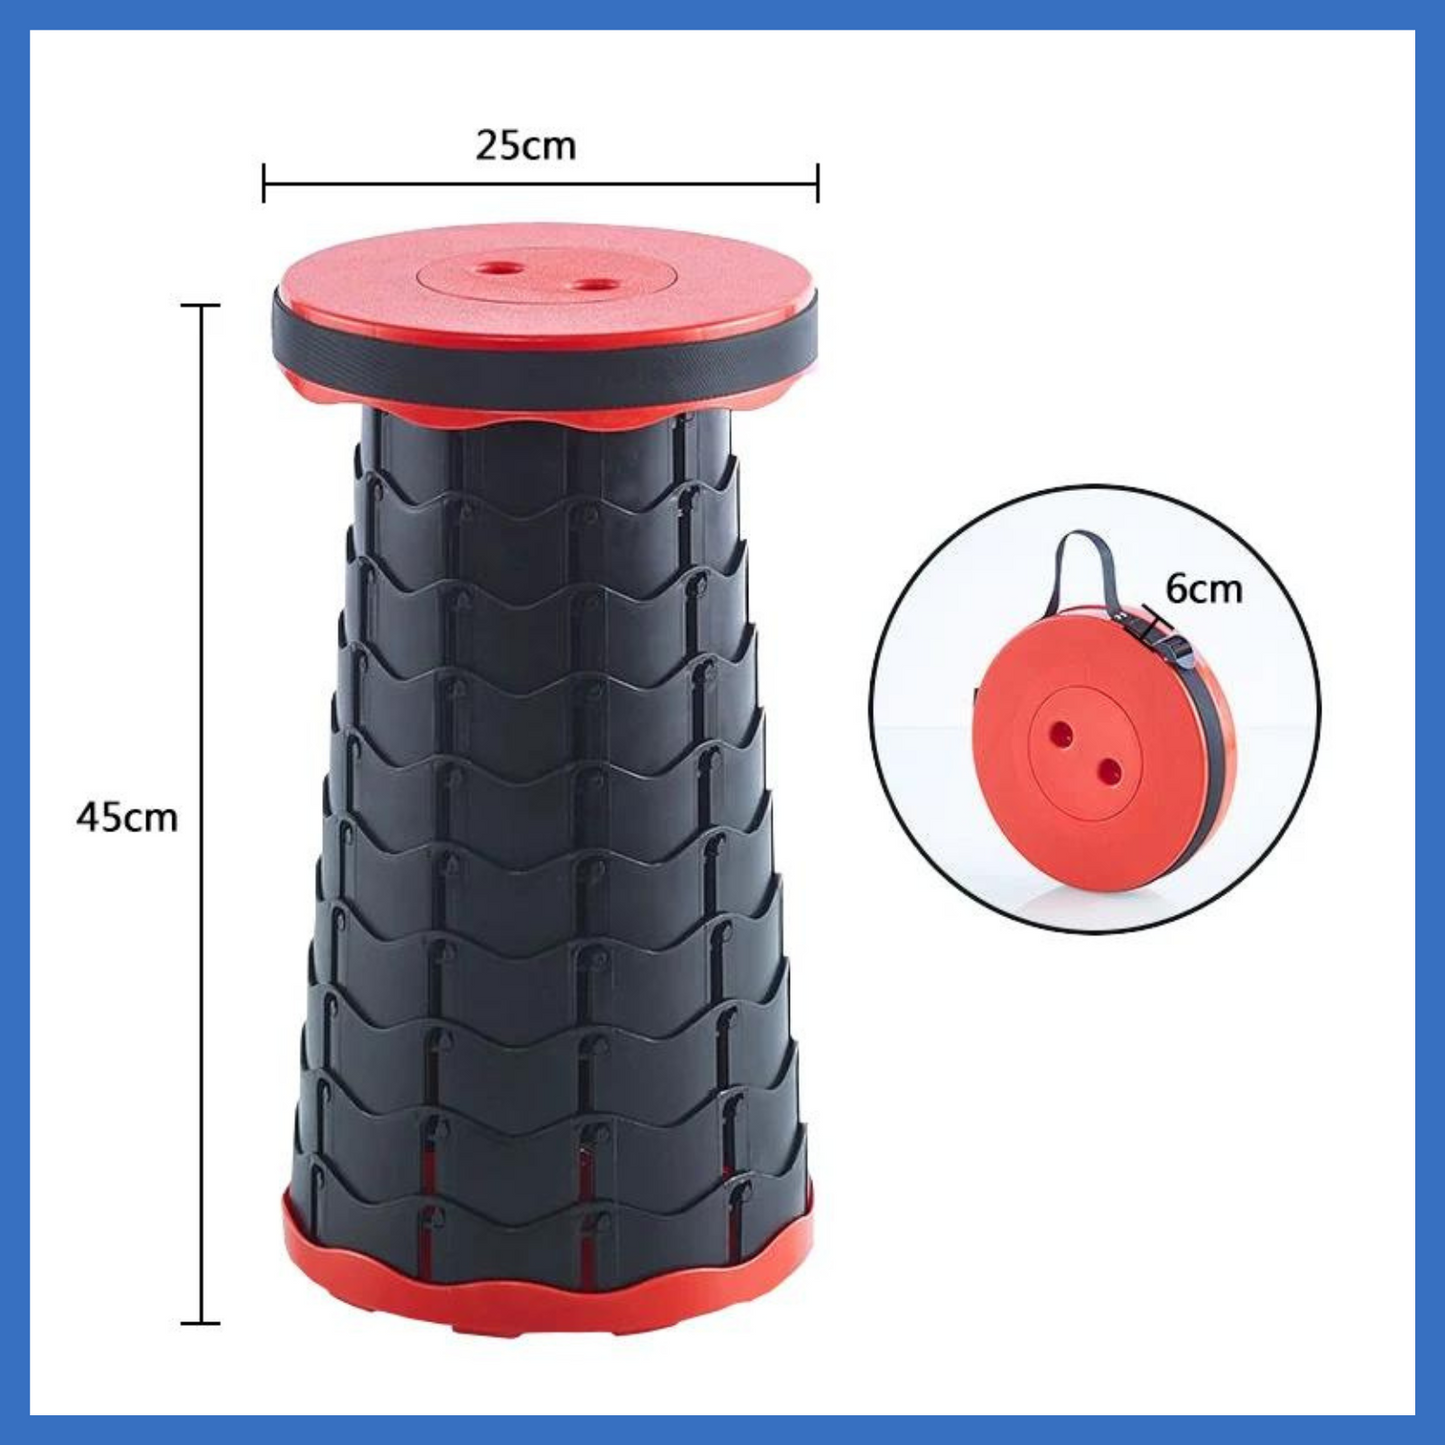 Portable Folding Telescopic Stool Lightweight with Carry Bag